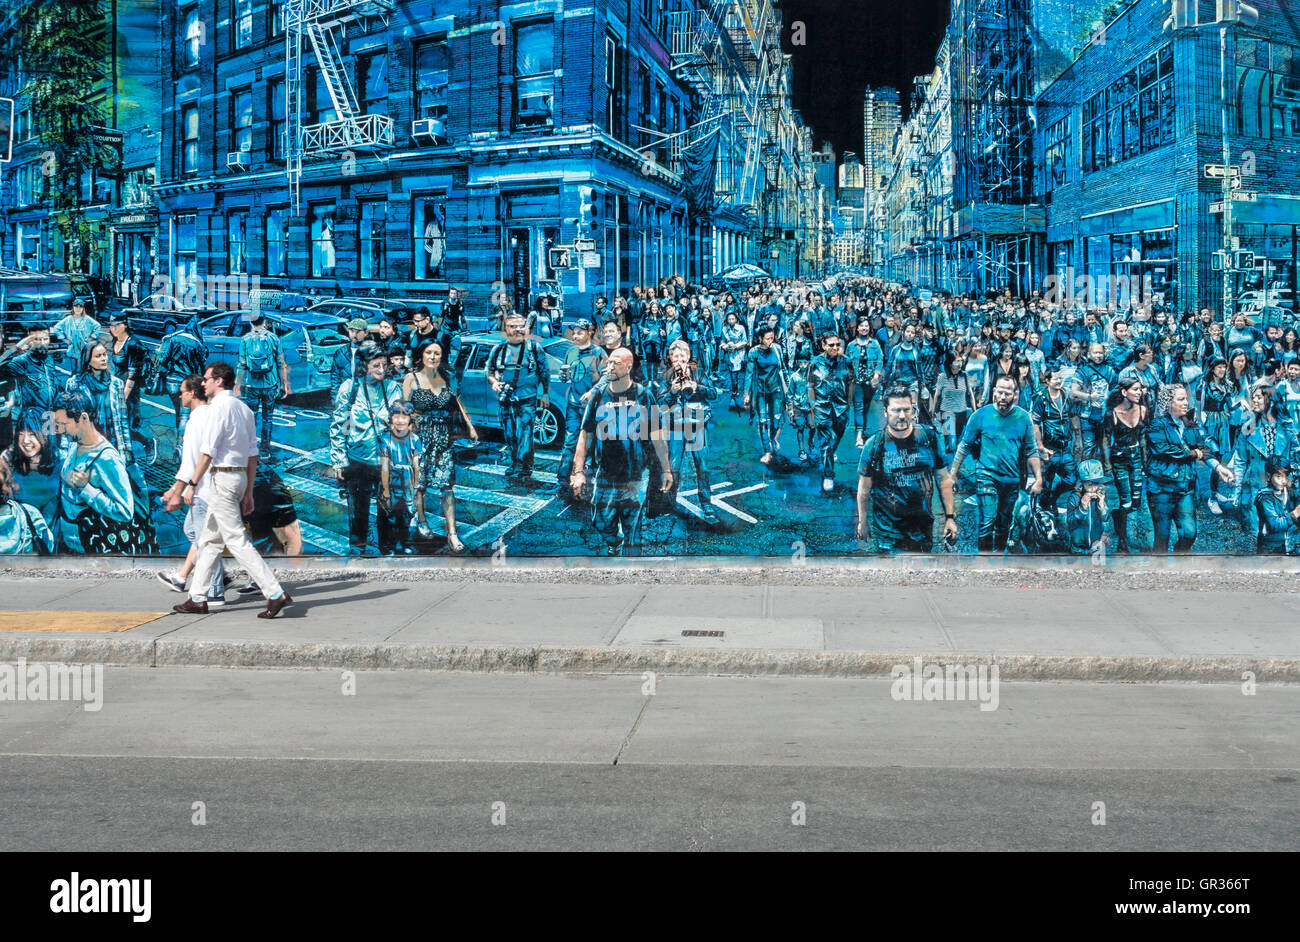 Street art mural at Houston and the Bowery in New York City Stock Photo